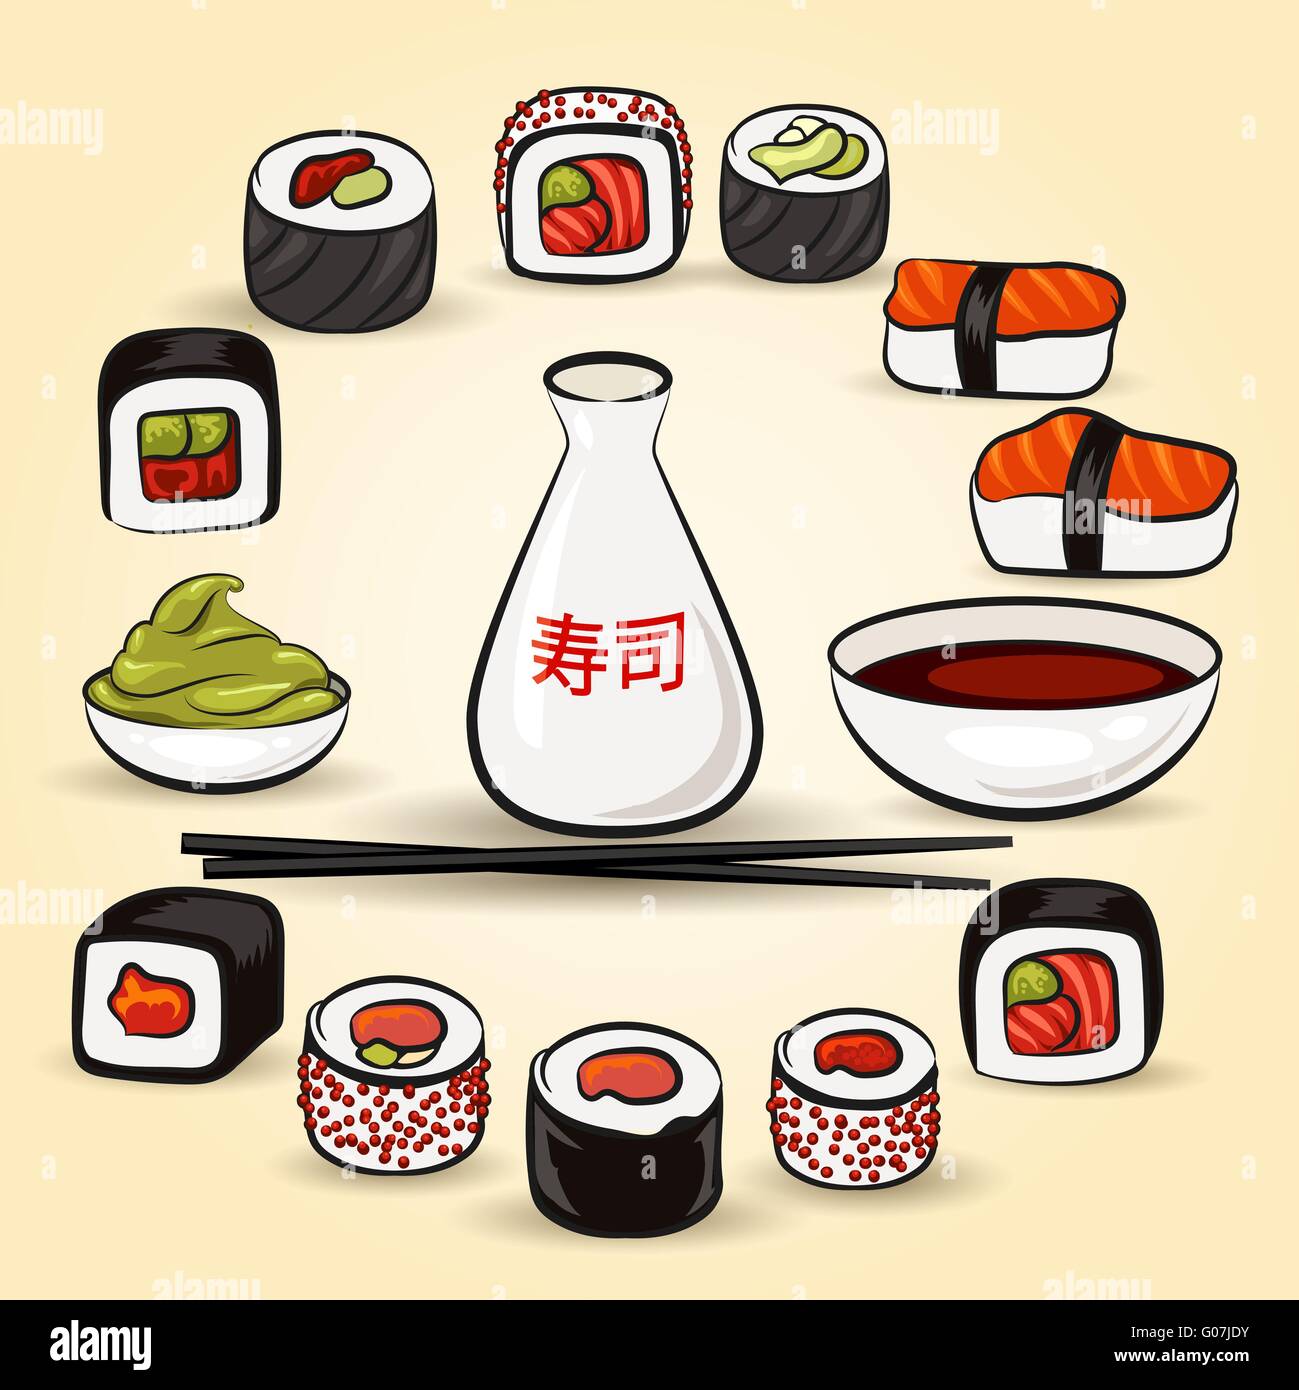 Sushi Bar set. Assorted japan food and species. Illustration in cartoon style. Stock Vector